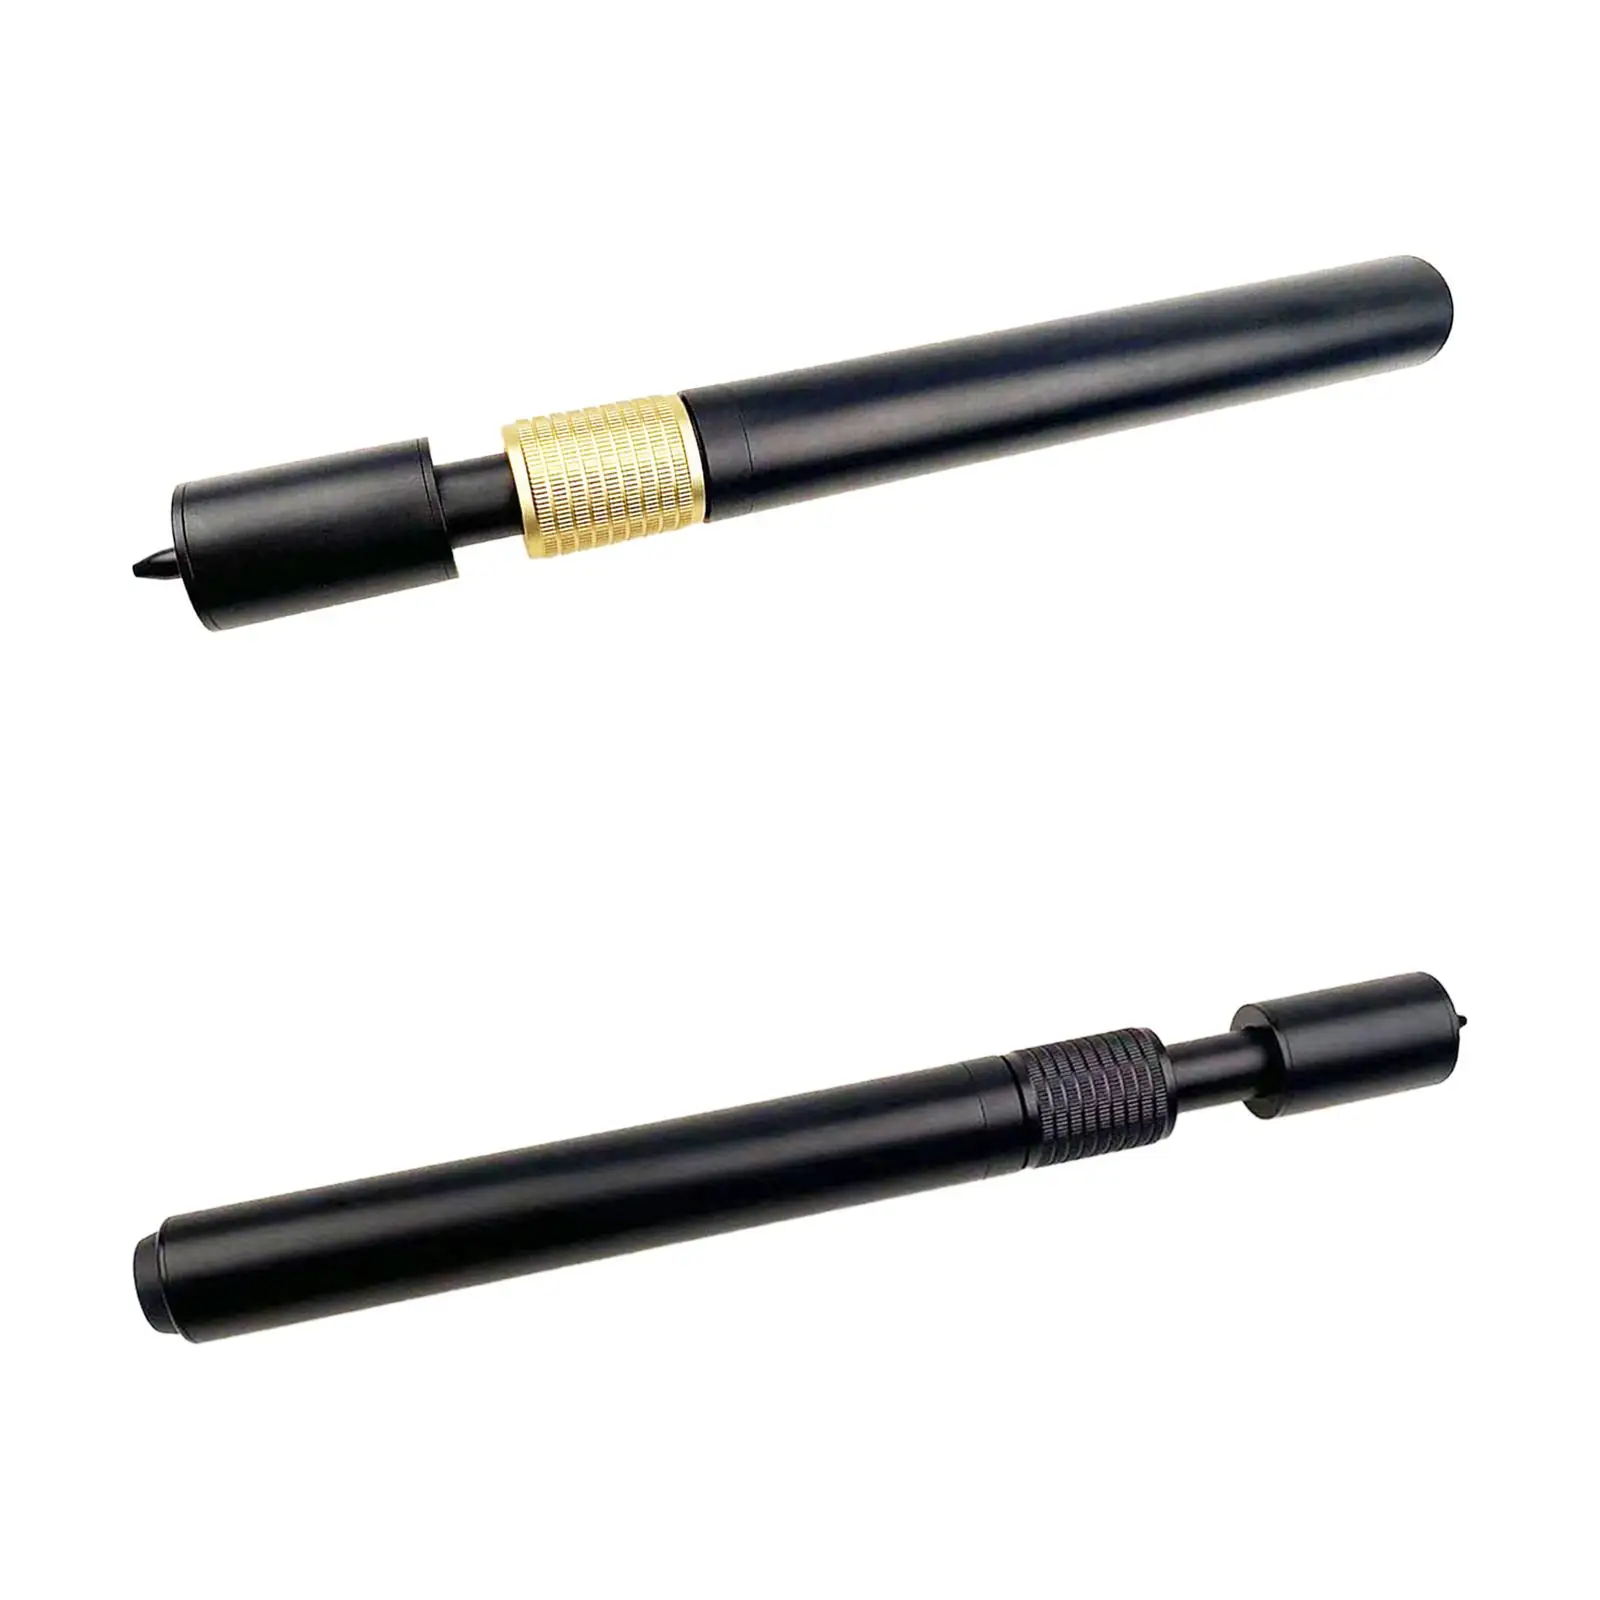 Billiards Pool Cue Extension End Lengthener Portable Cue Extended Weights